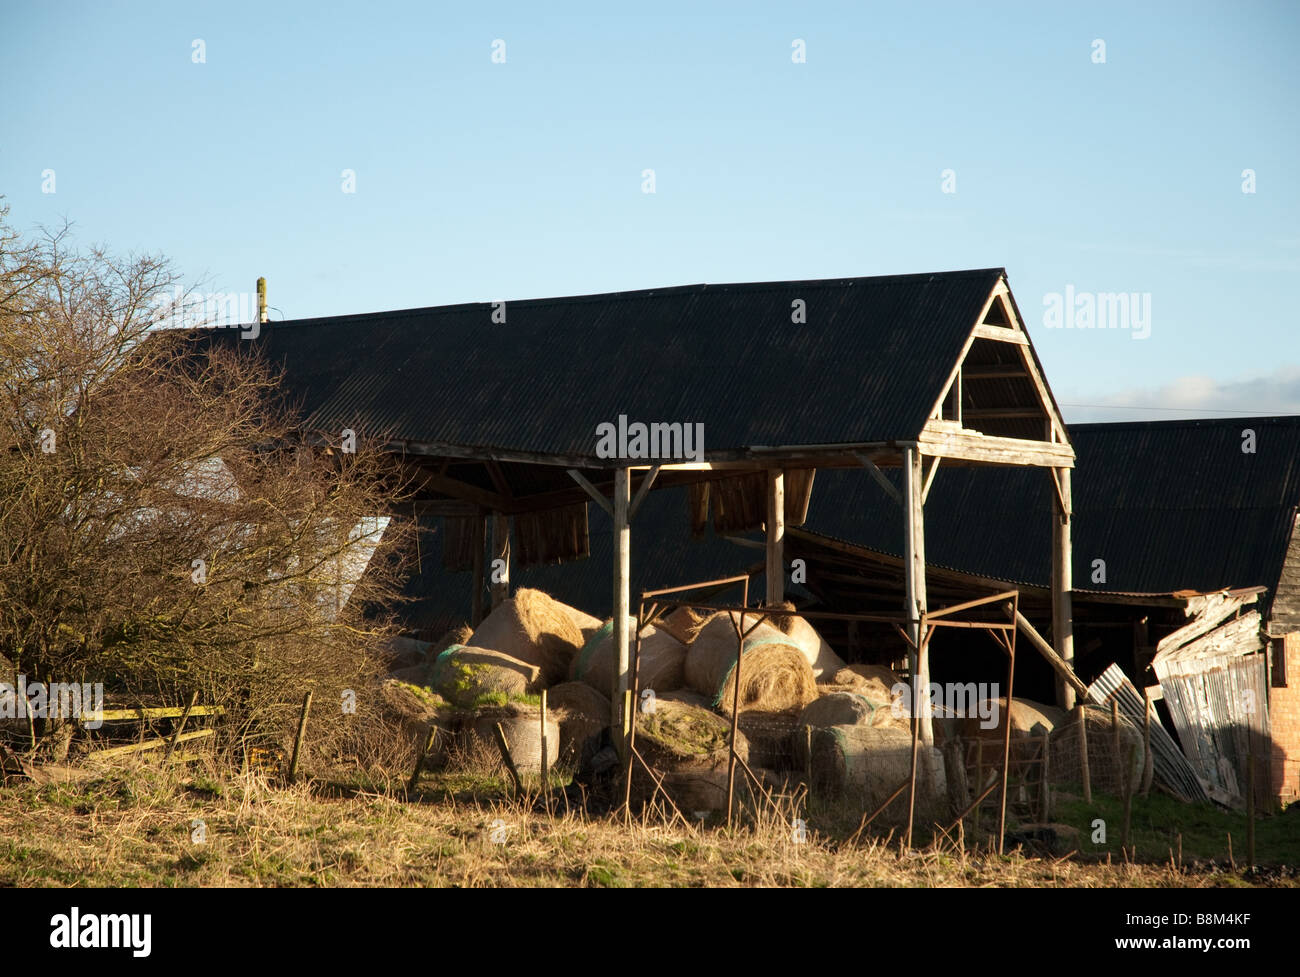 An old rustic Hay Barn in a field lit up by golden sunshine. Stock Photo